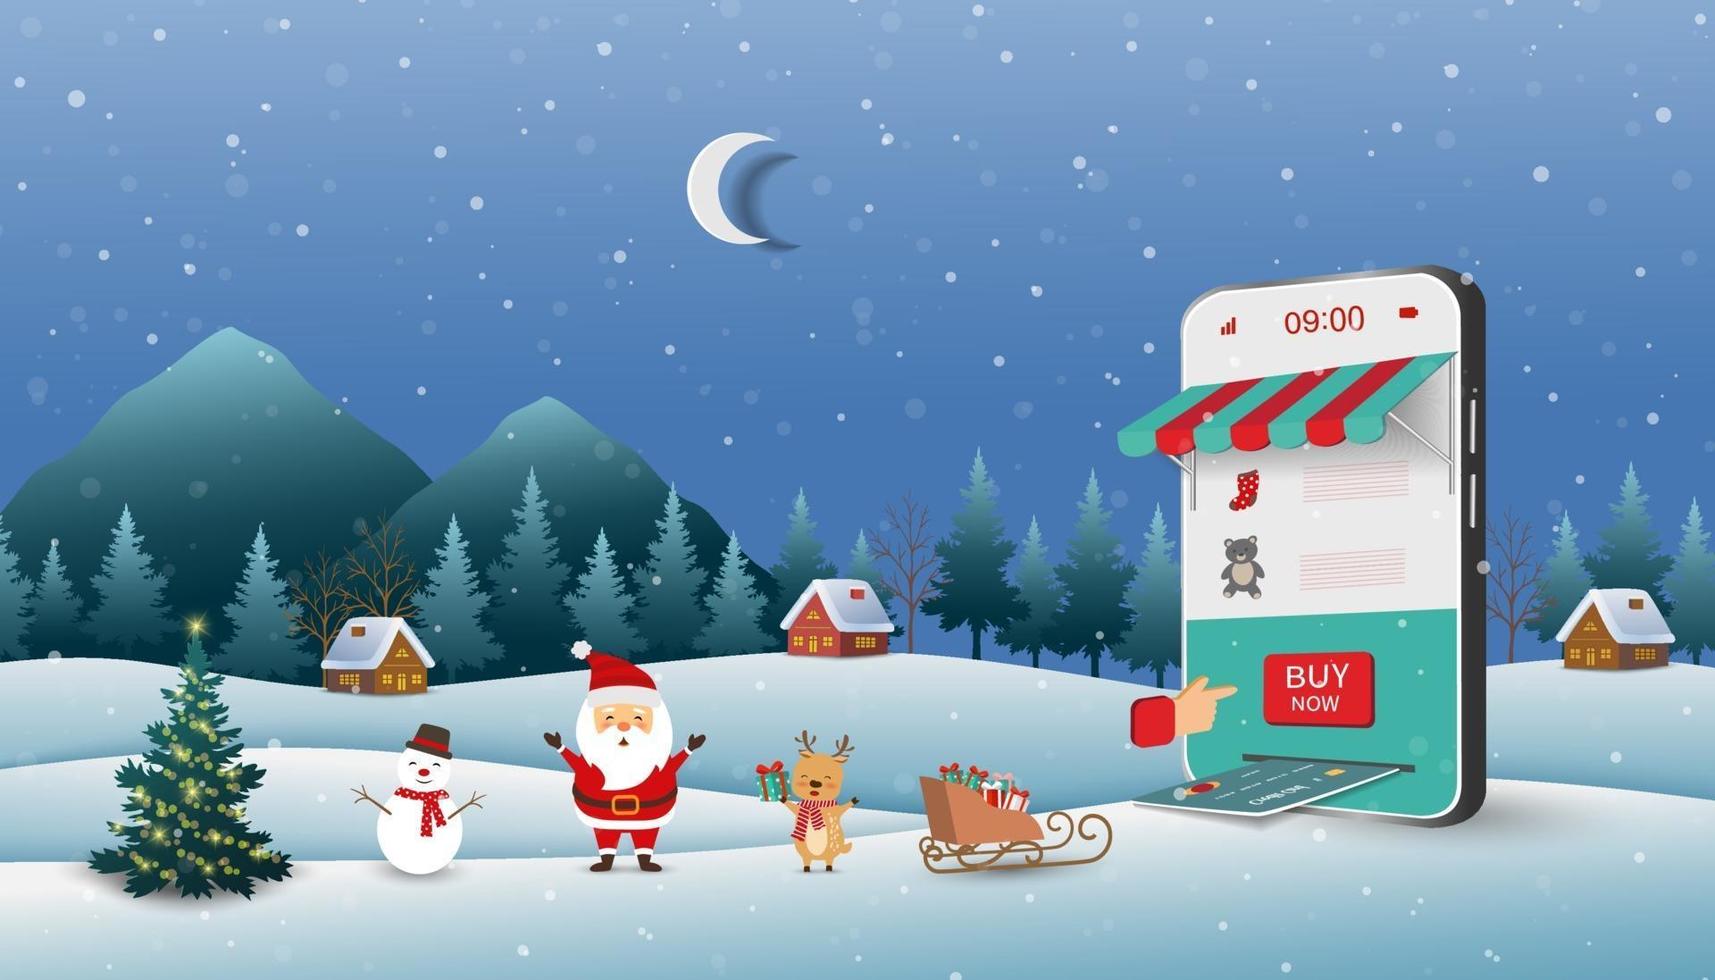 Christmas scene with Santa Claus shopping online on website or mobile application vector